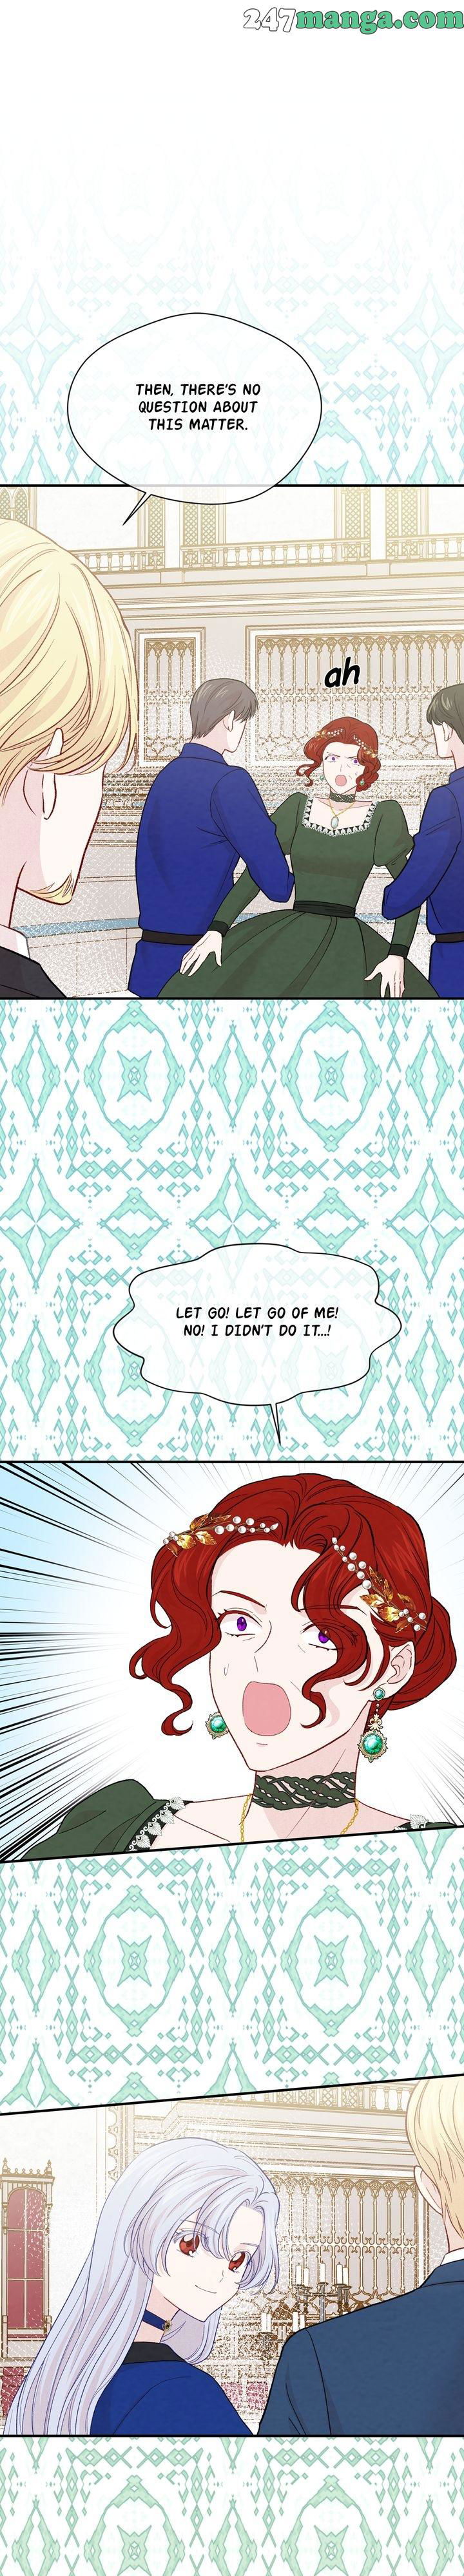 IRIS - Lady with a Smartphone Chapter 116 page 7